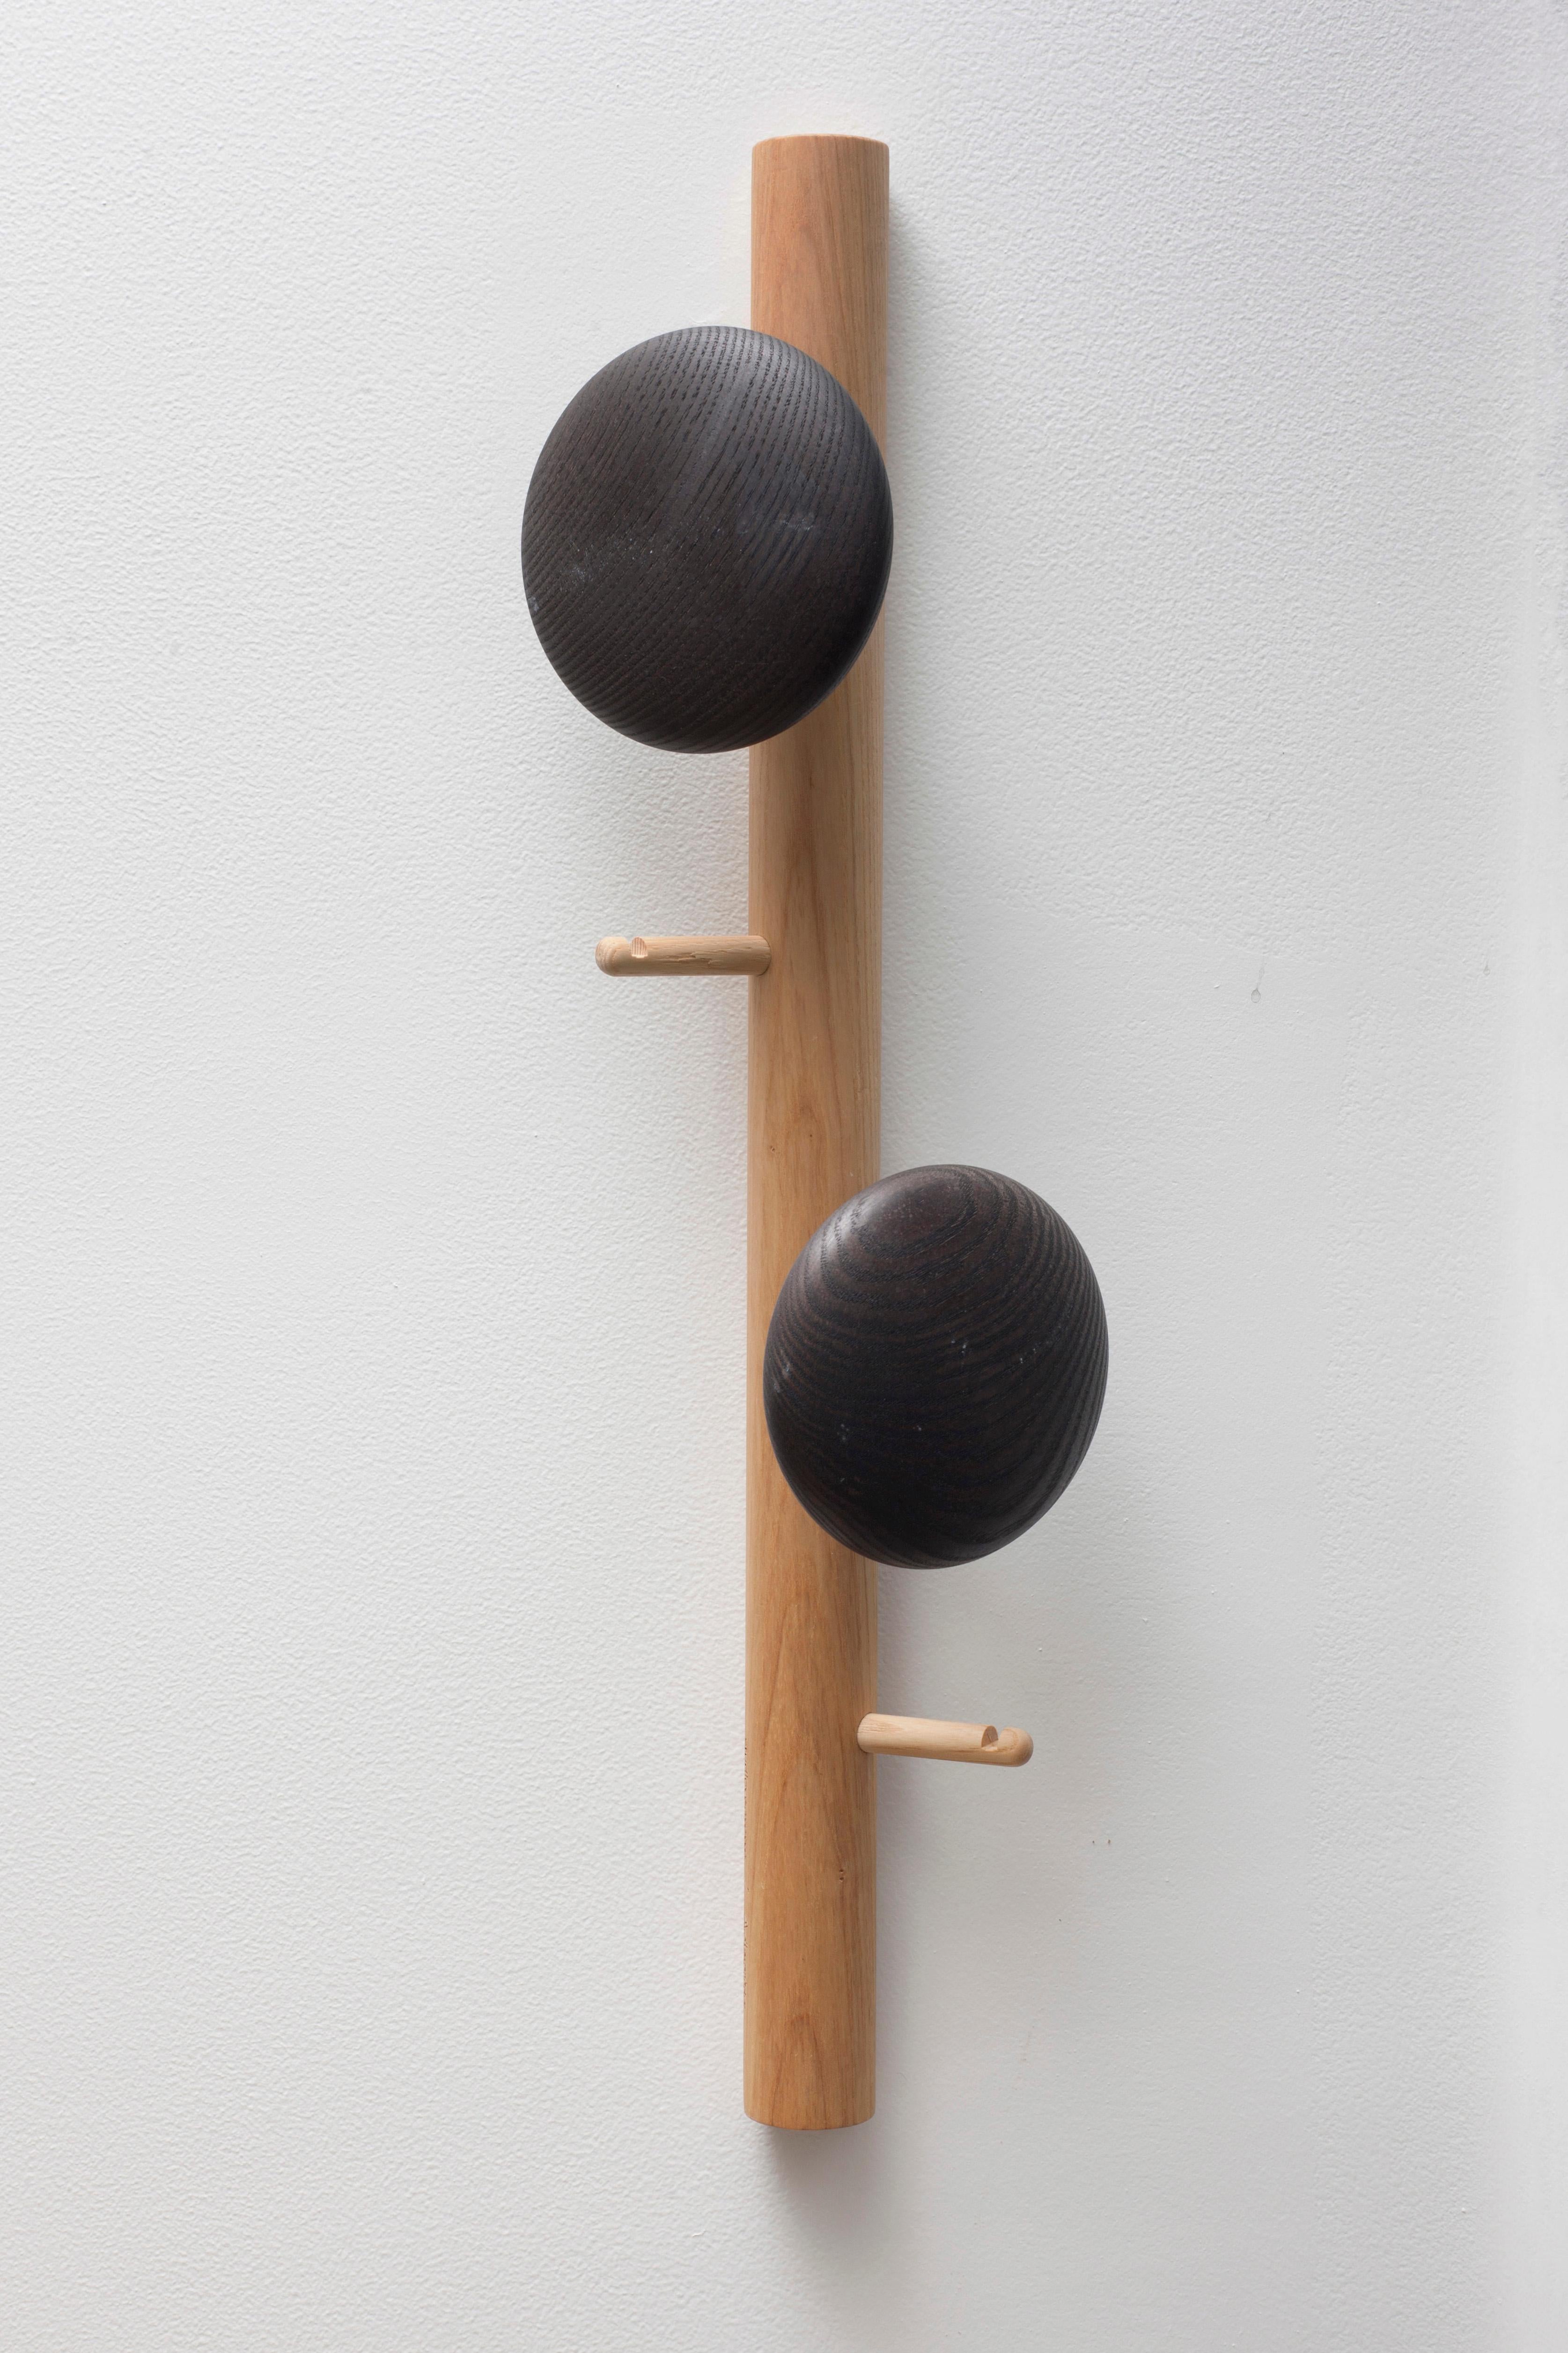 Coat rack in turned solid ash. 
Wall-mounted, it (and the coat hooks) are available in natural or black oiled versions.
Exclusive design by Studio Ventotto for Adentro.